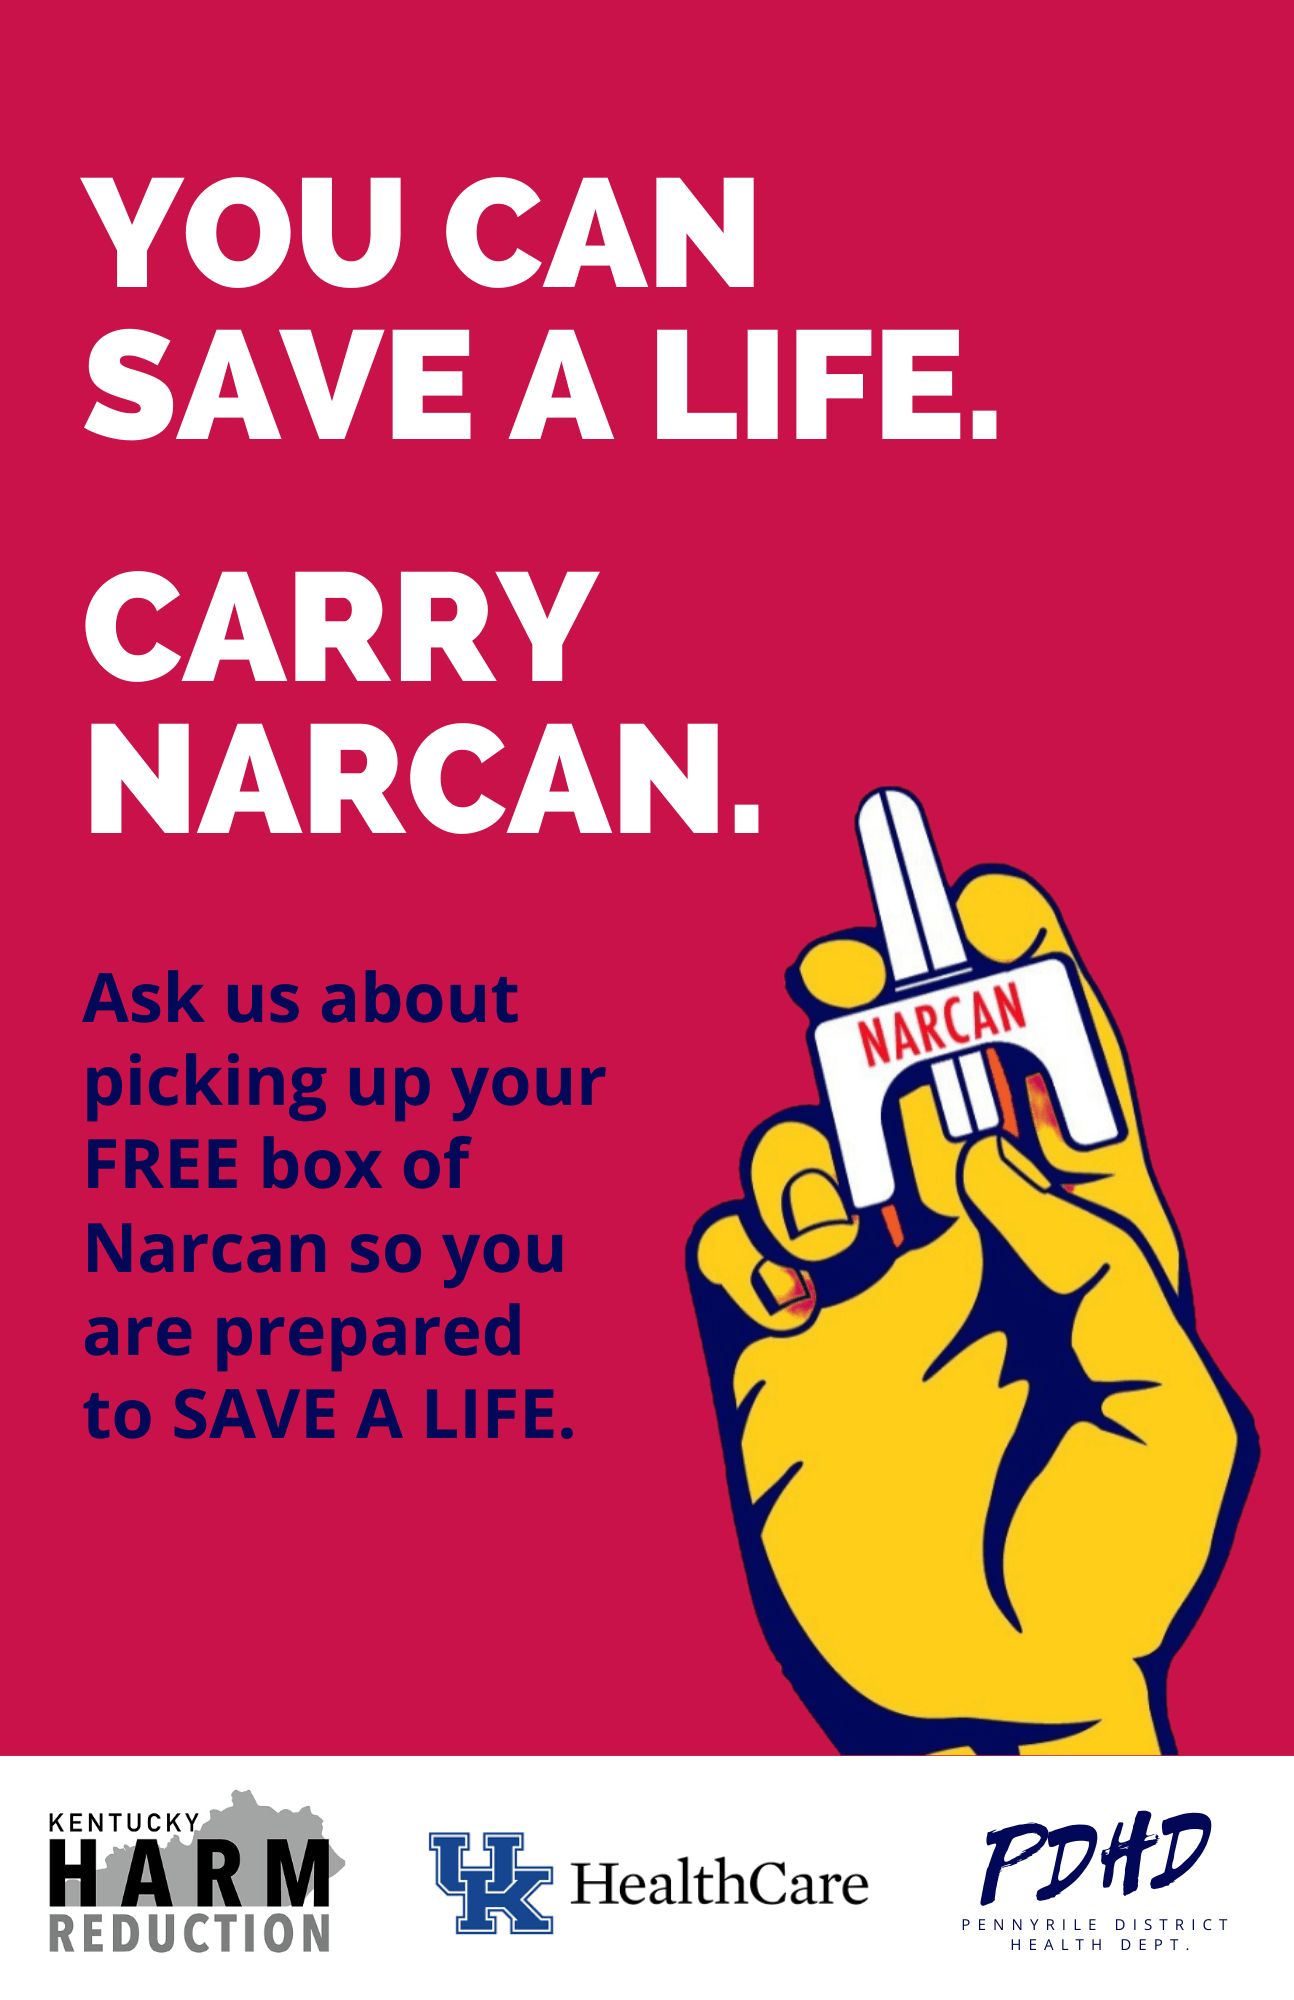 You Can Save A Life. Carry Narcan. Ask us about picking up your FREE box of Narcan so you are prepared to SAVE A LIFE.